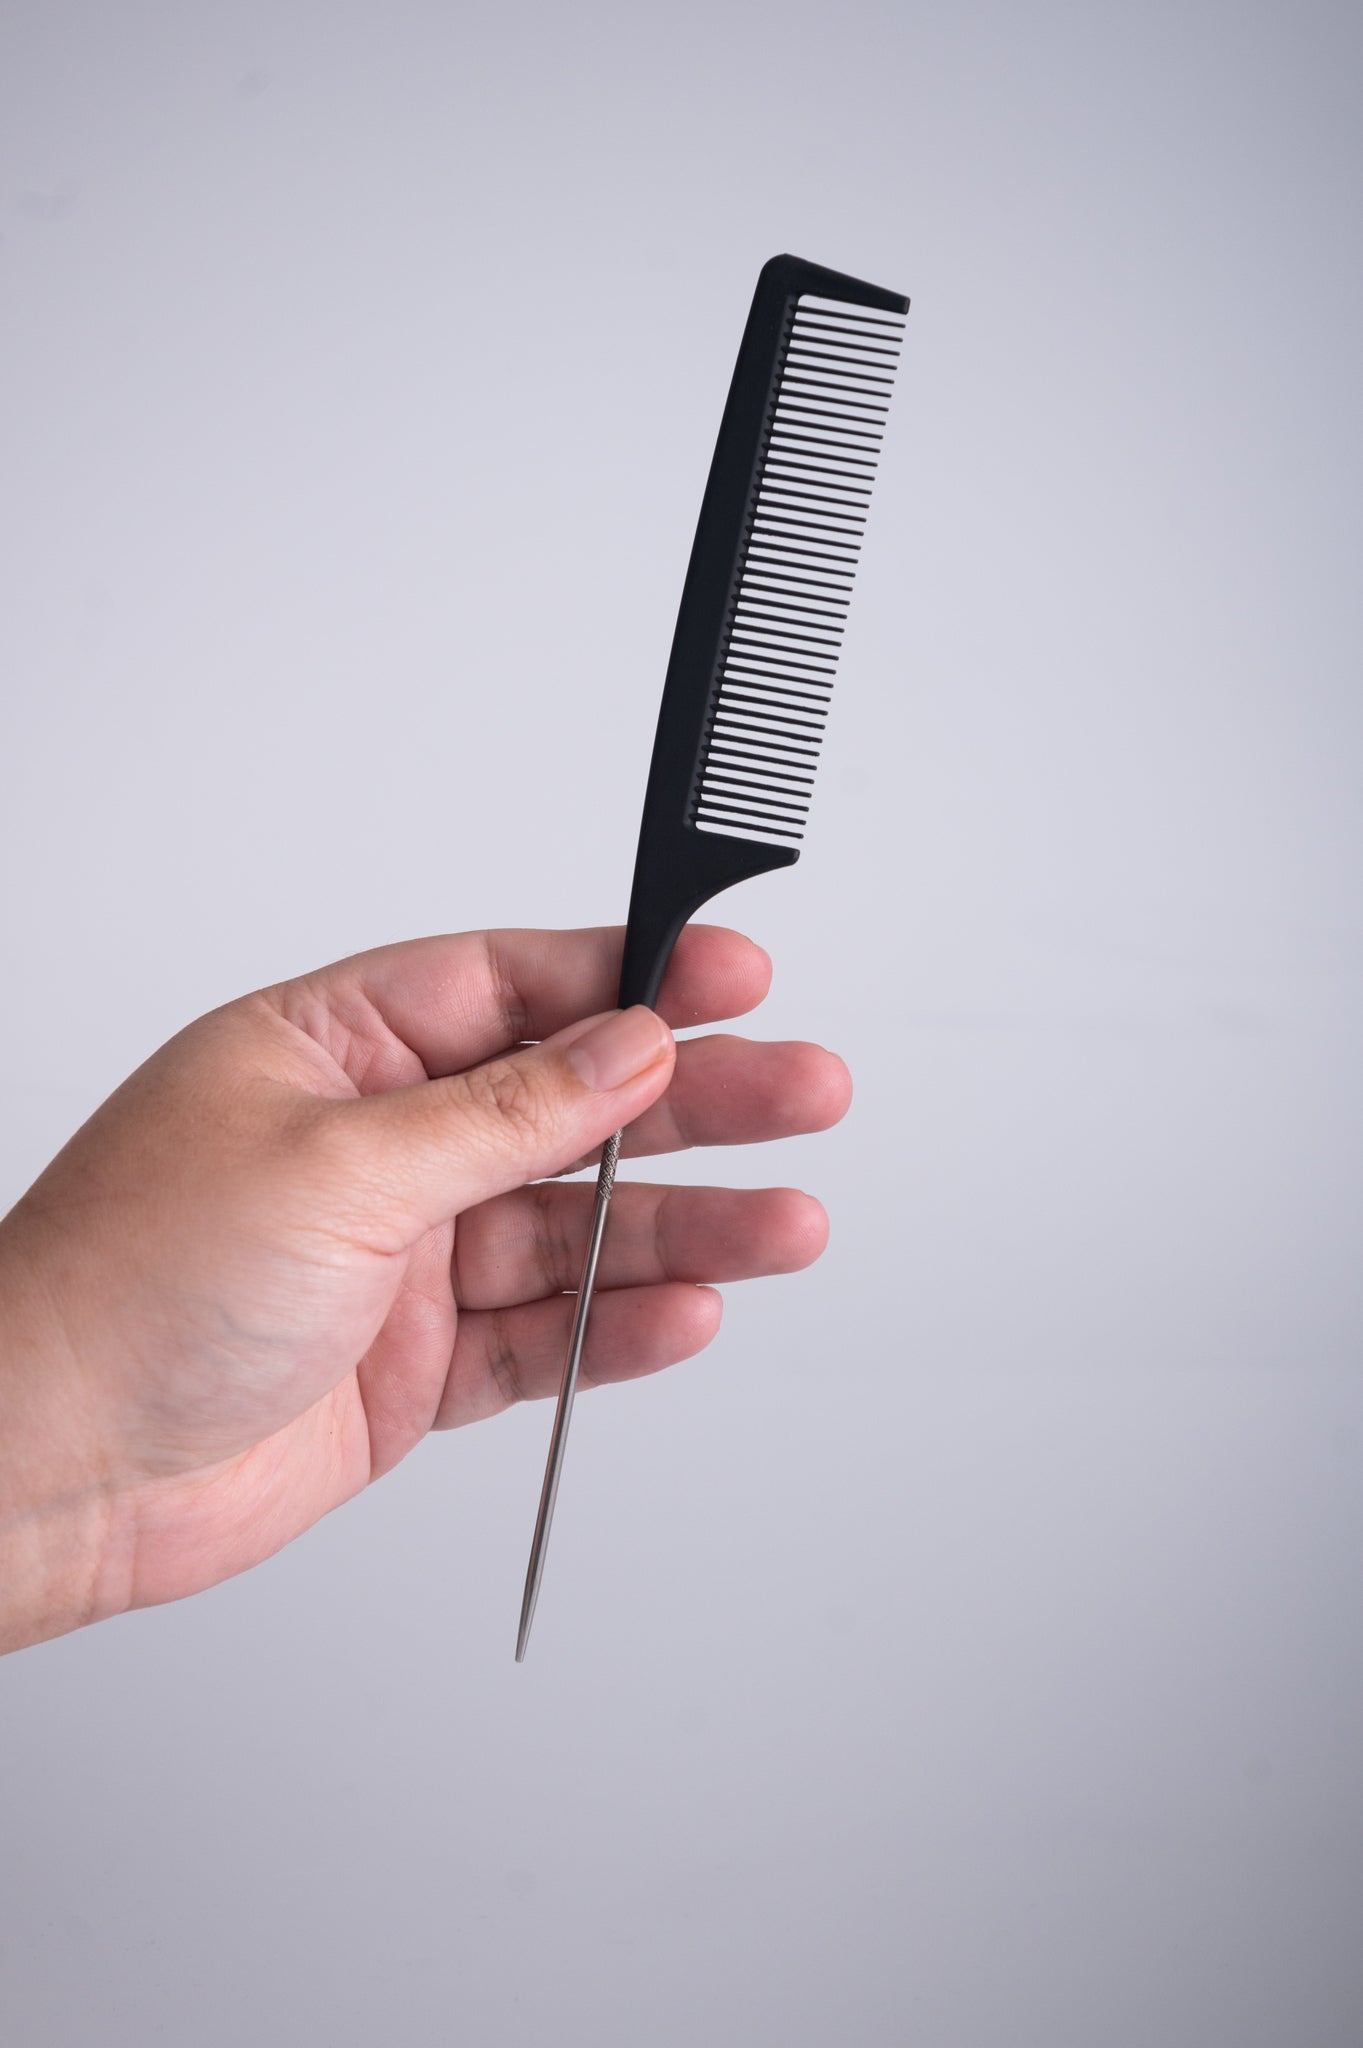 Hair Extension Carbon Tail Comb with a white background